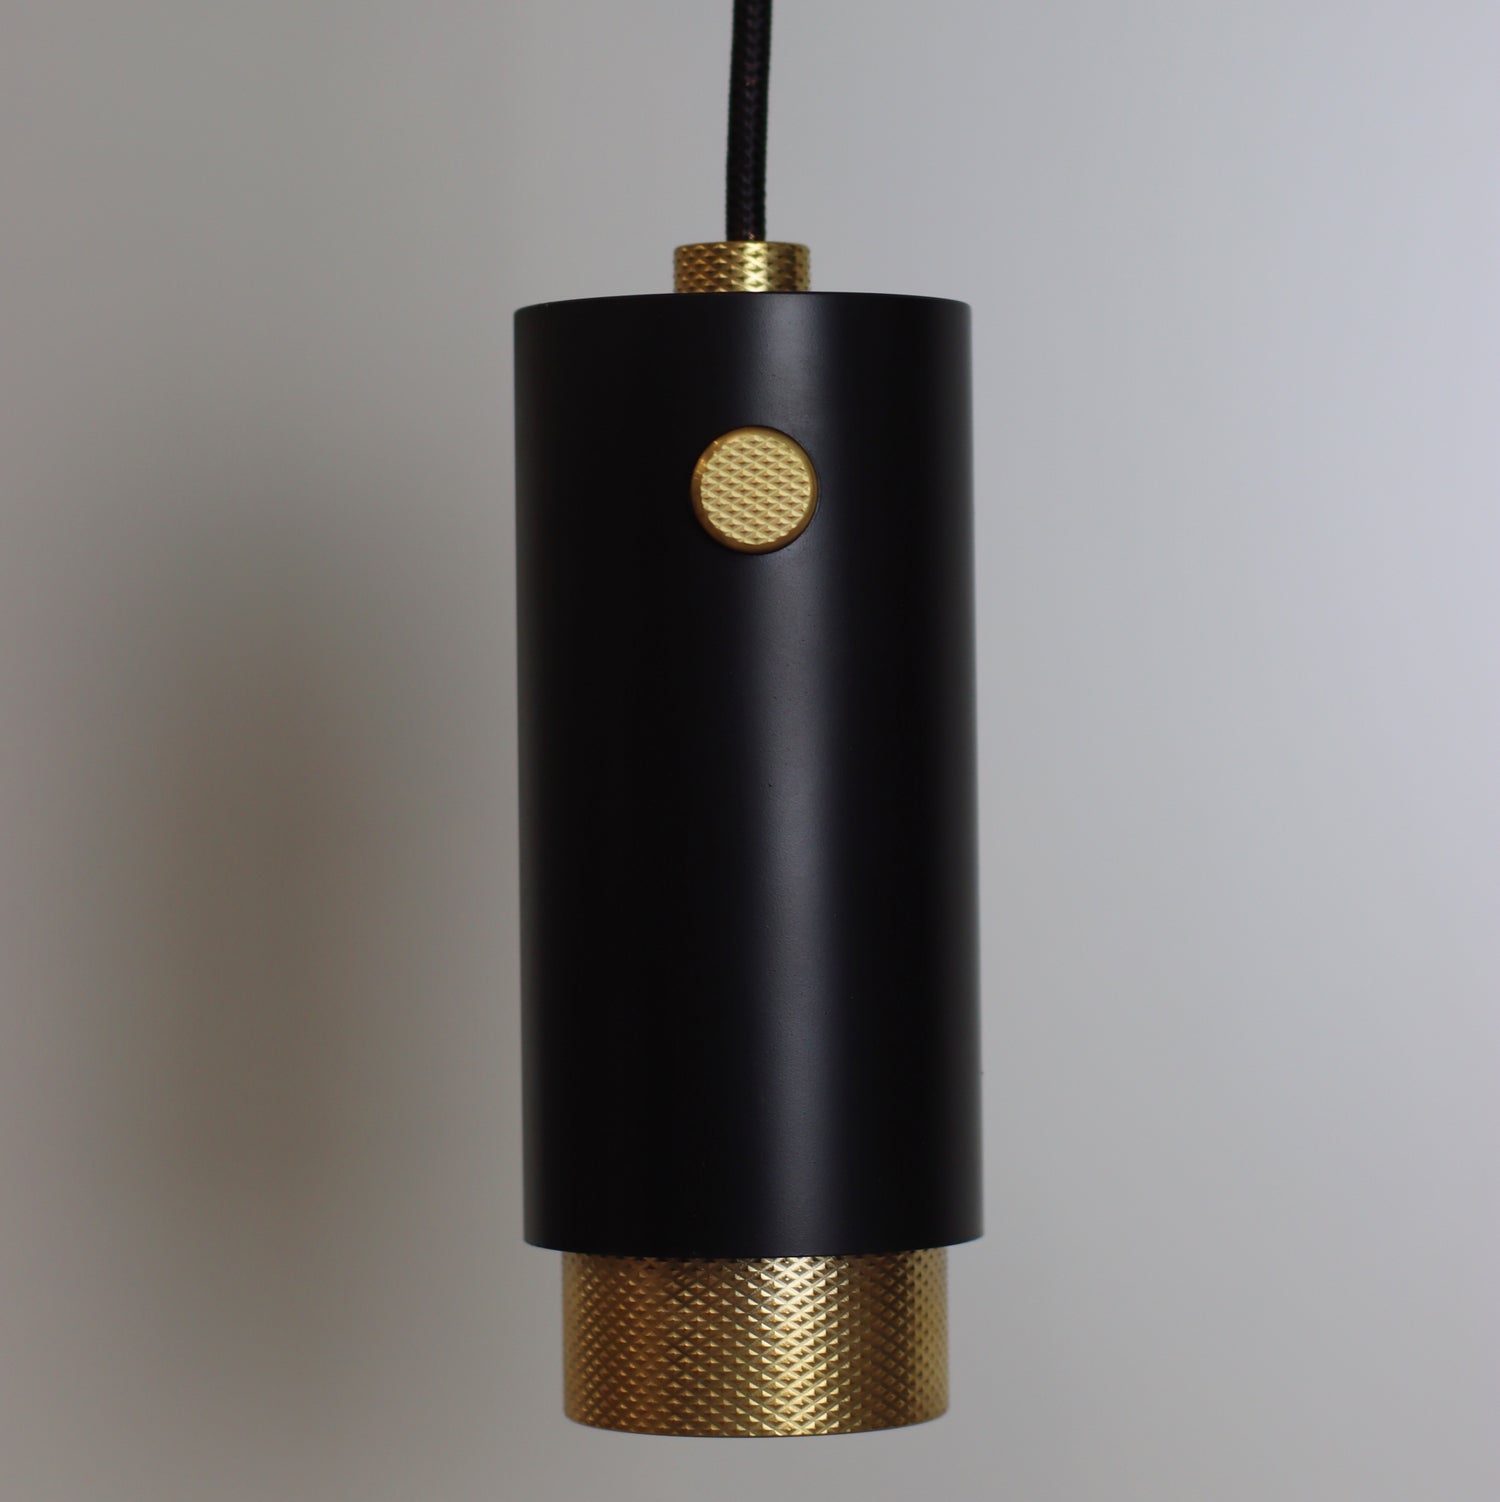 pendant light from ceiling with fabric cable and solid brass accents. knurled brass. black cerakote paint light body. knurled decor. 